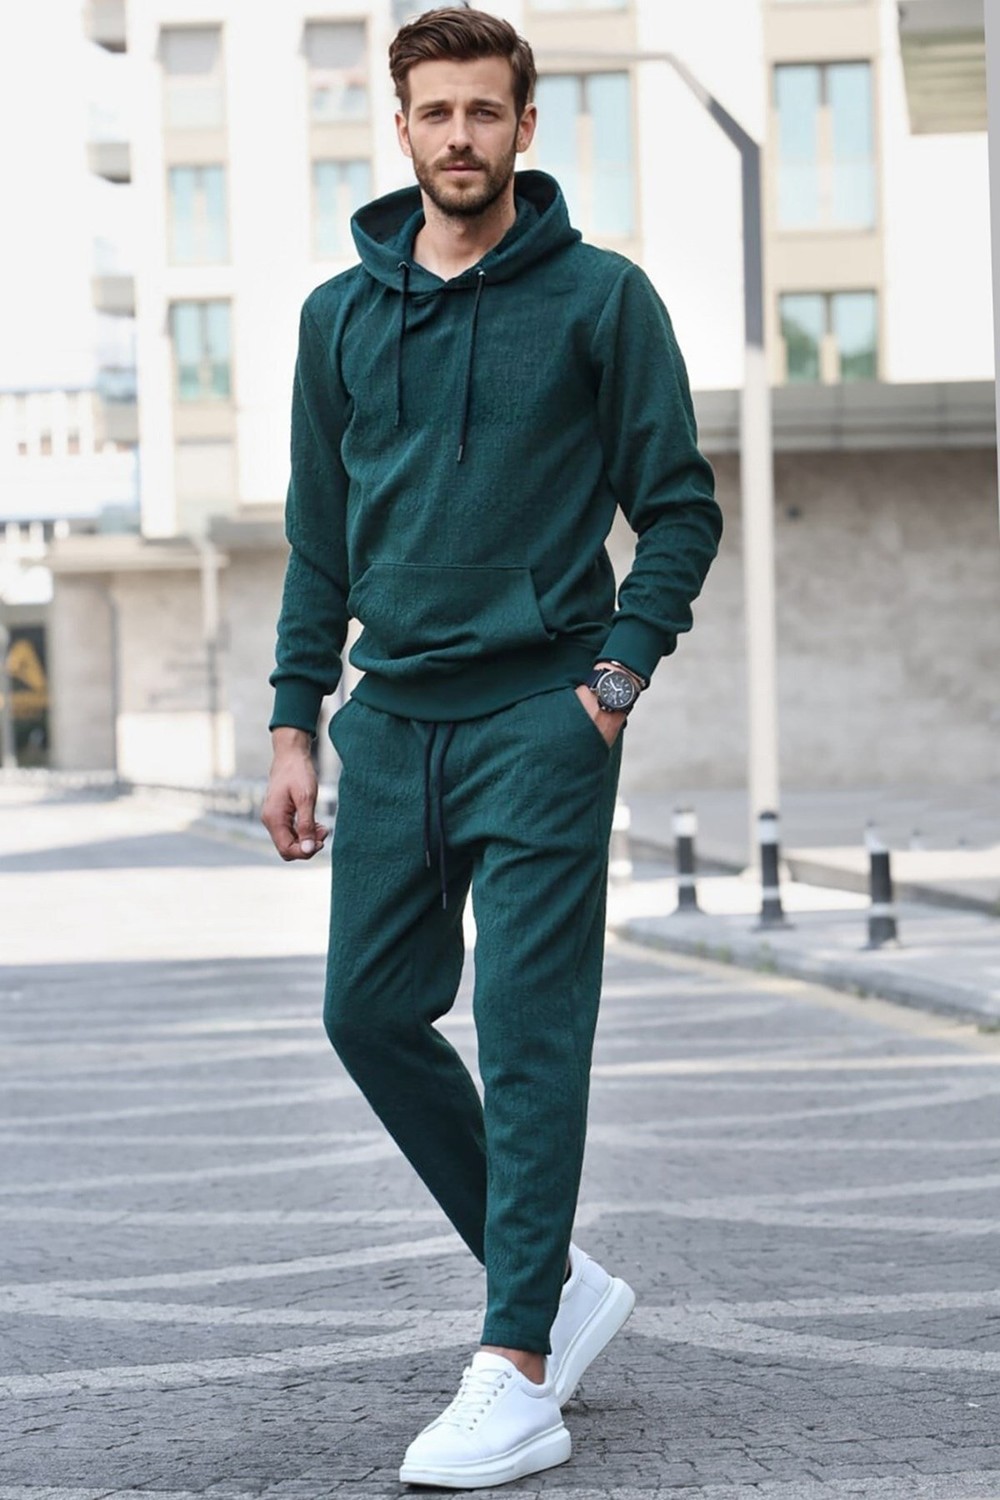 Madmext Sports Sweatsuit Set - Green - Relaxed fit